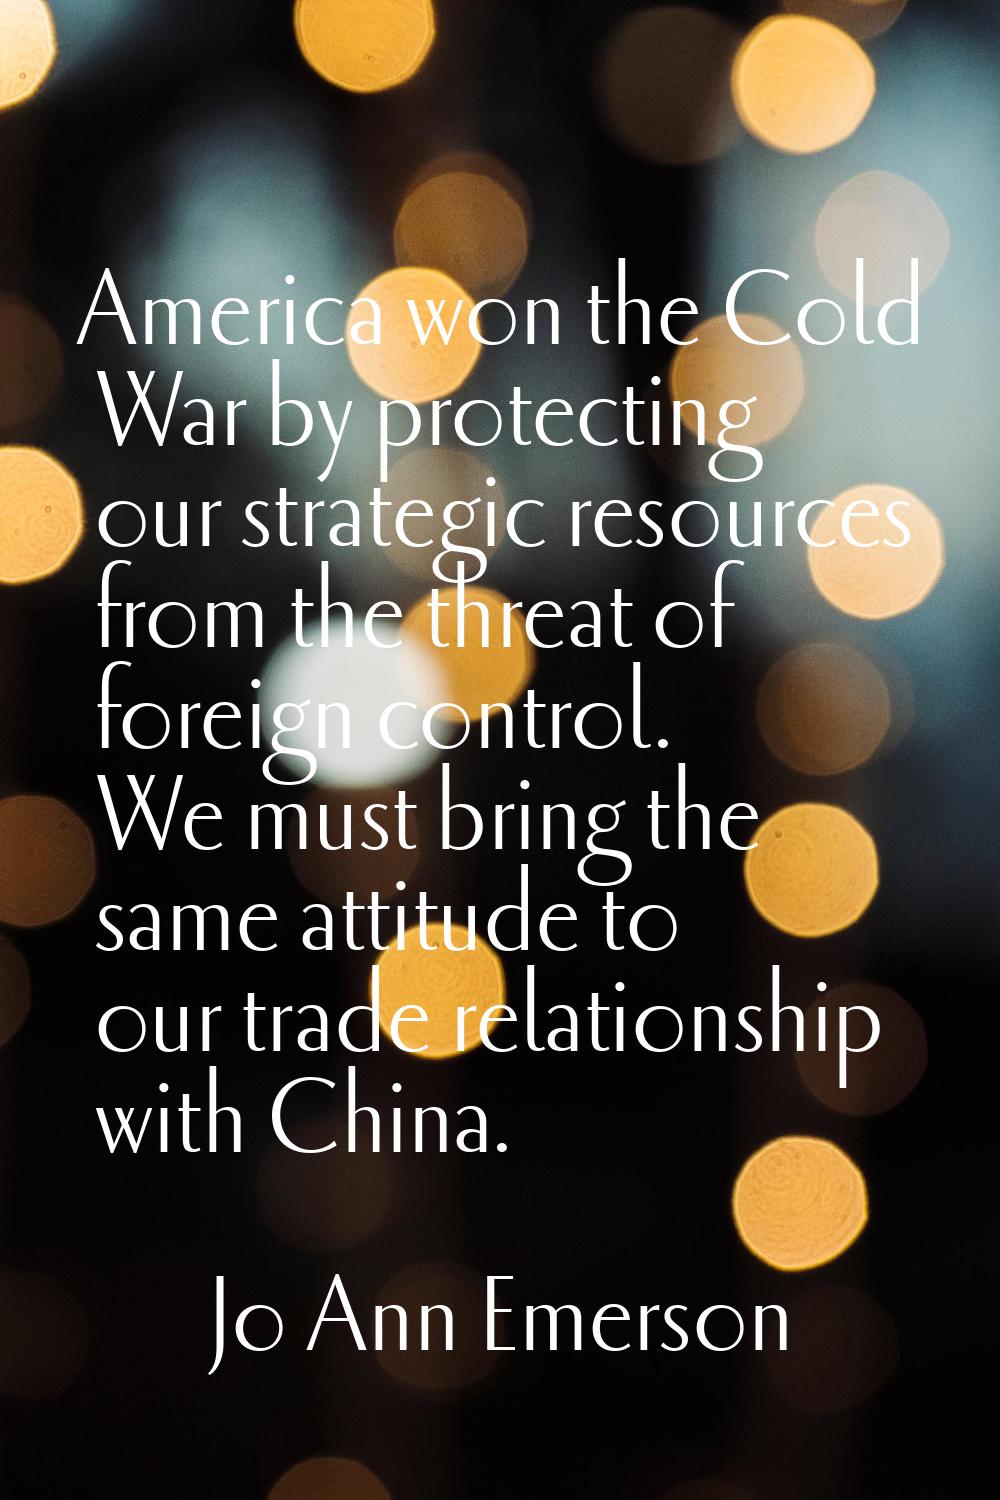 America won the Cold War by protecting our strategic resources from the threat of foreign control. 